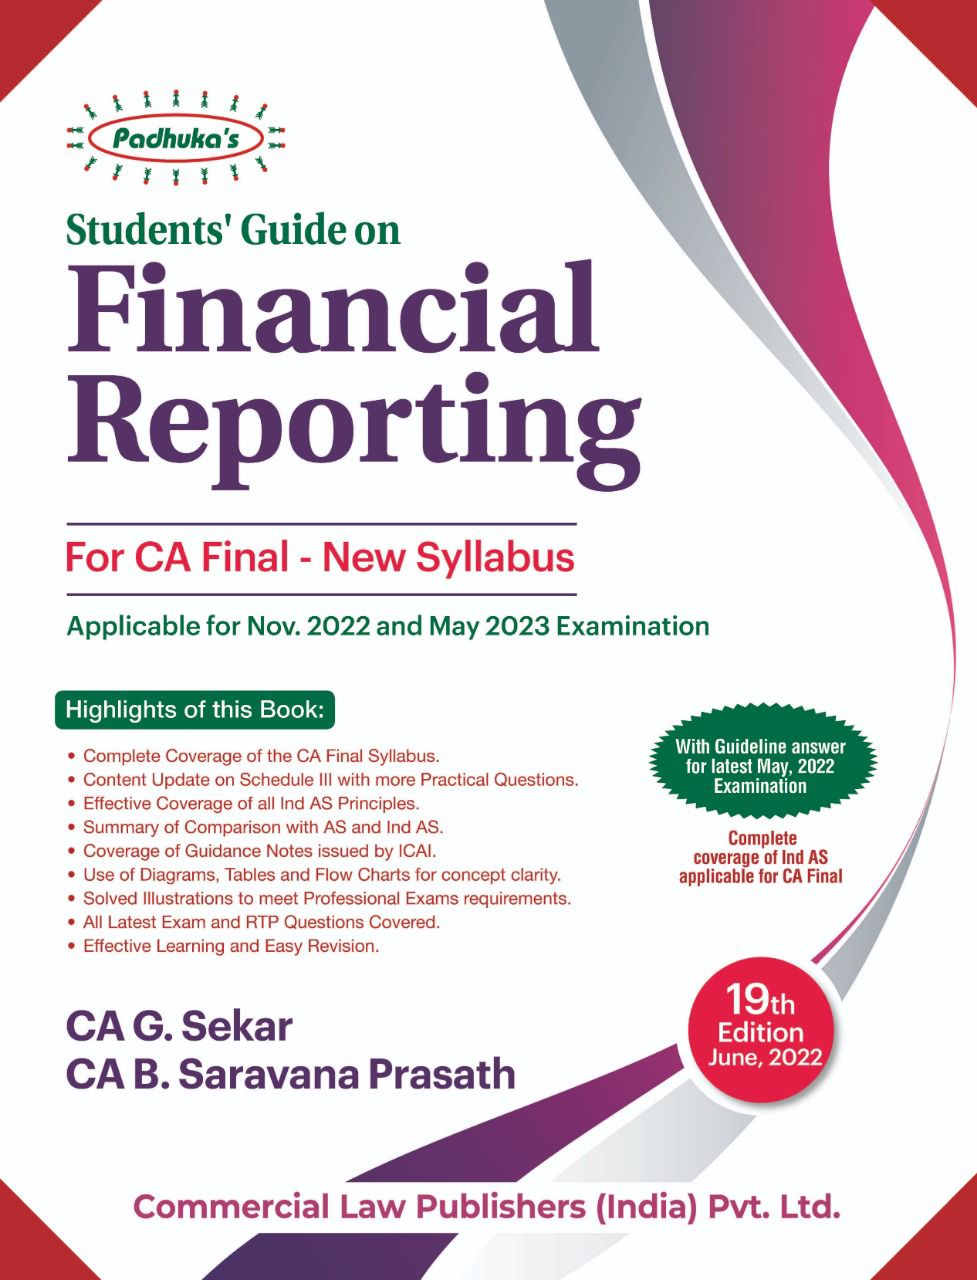 Padhuka Students Guide on Financial Reporting new syllabus For CA Final by G Sekar , B Sarvana Prasath Applicable for 2022 Exam(Commercial law publishers)